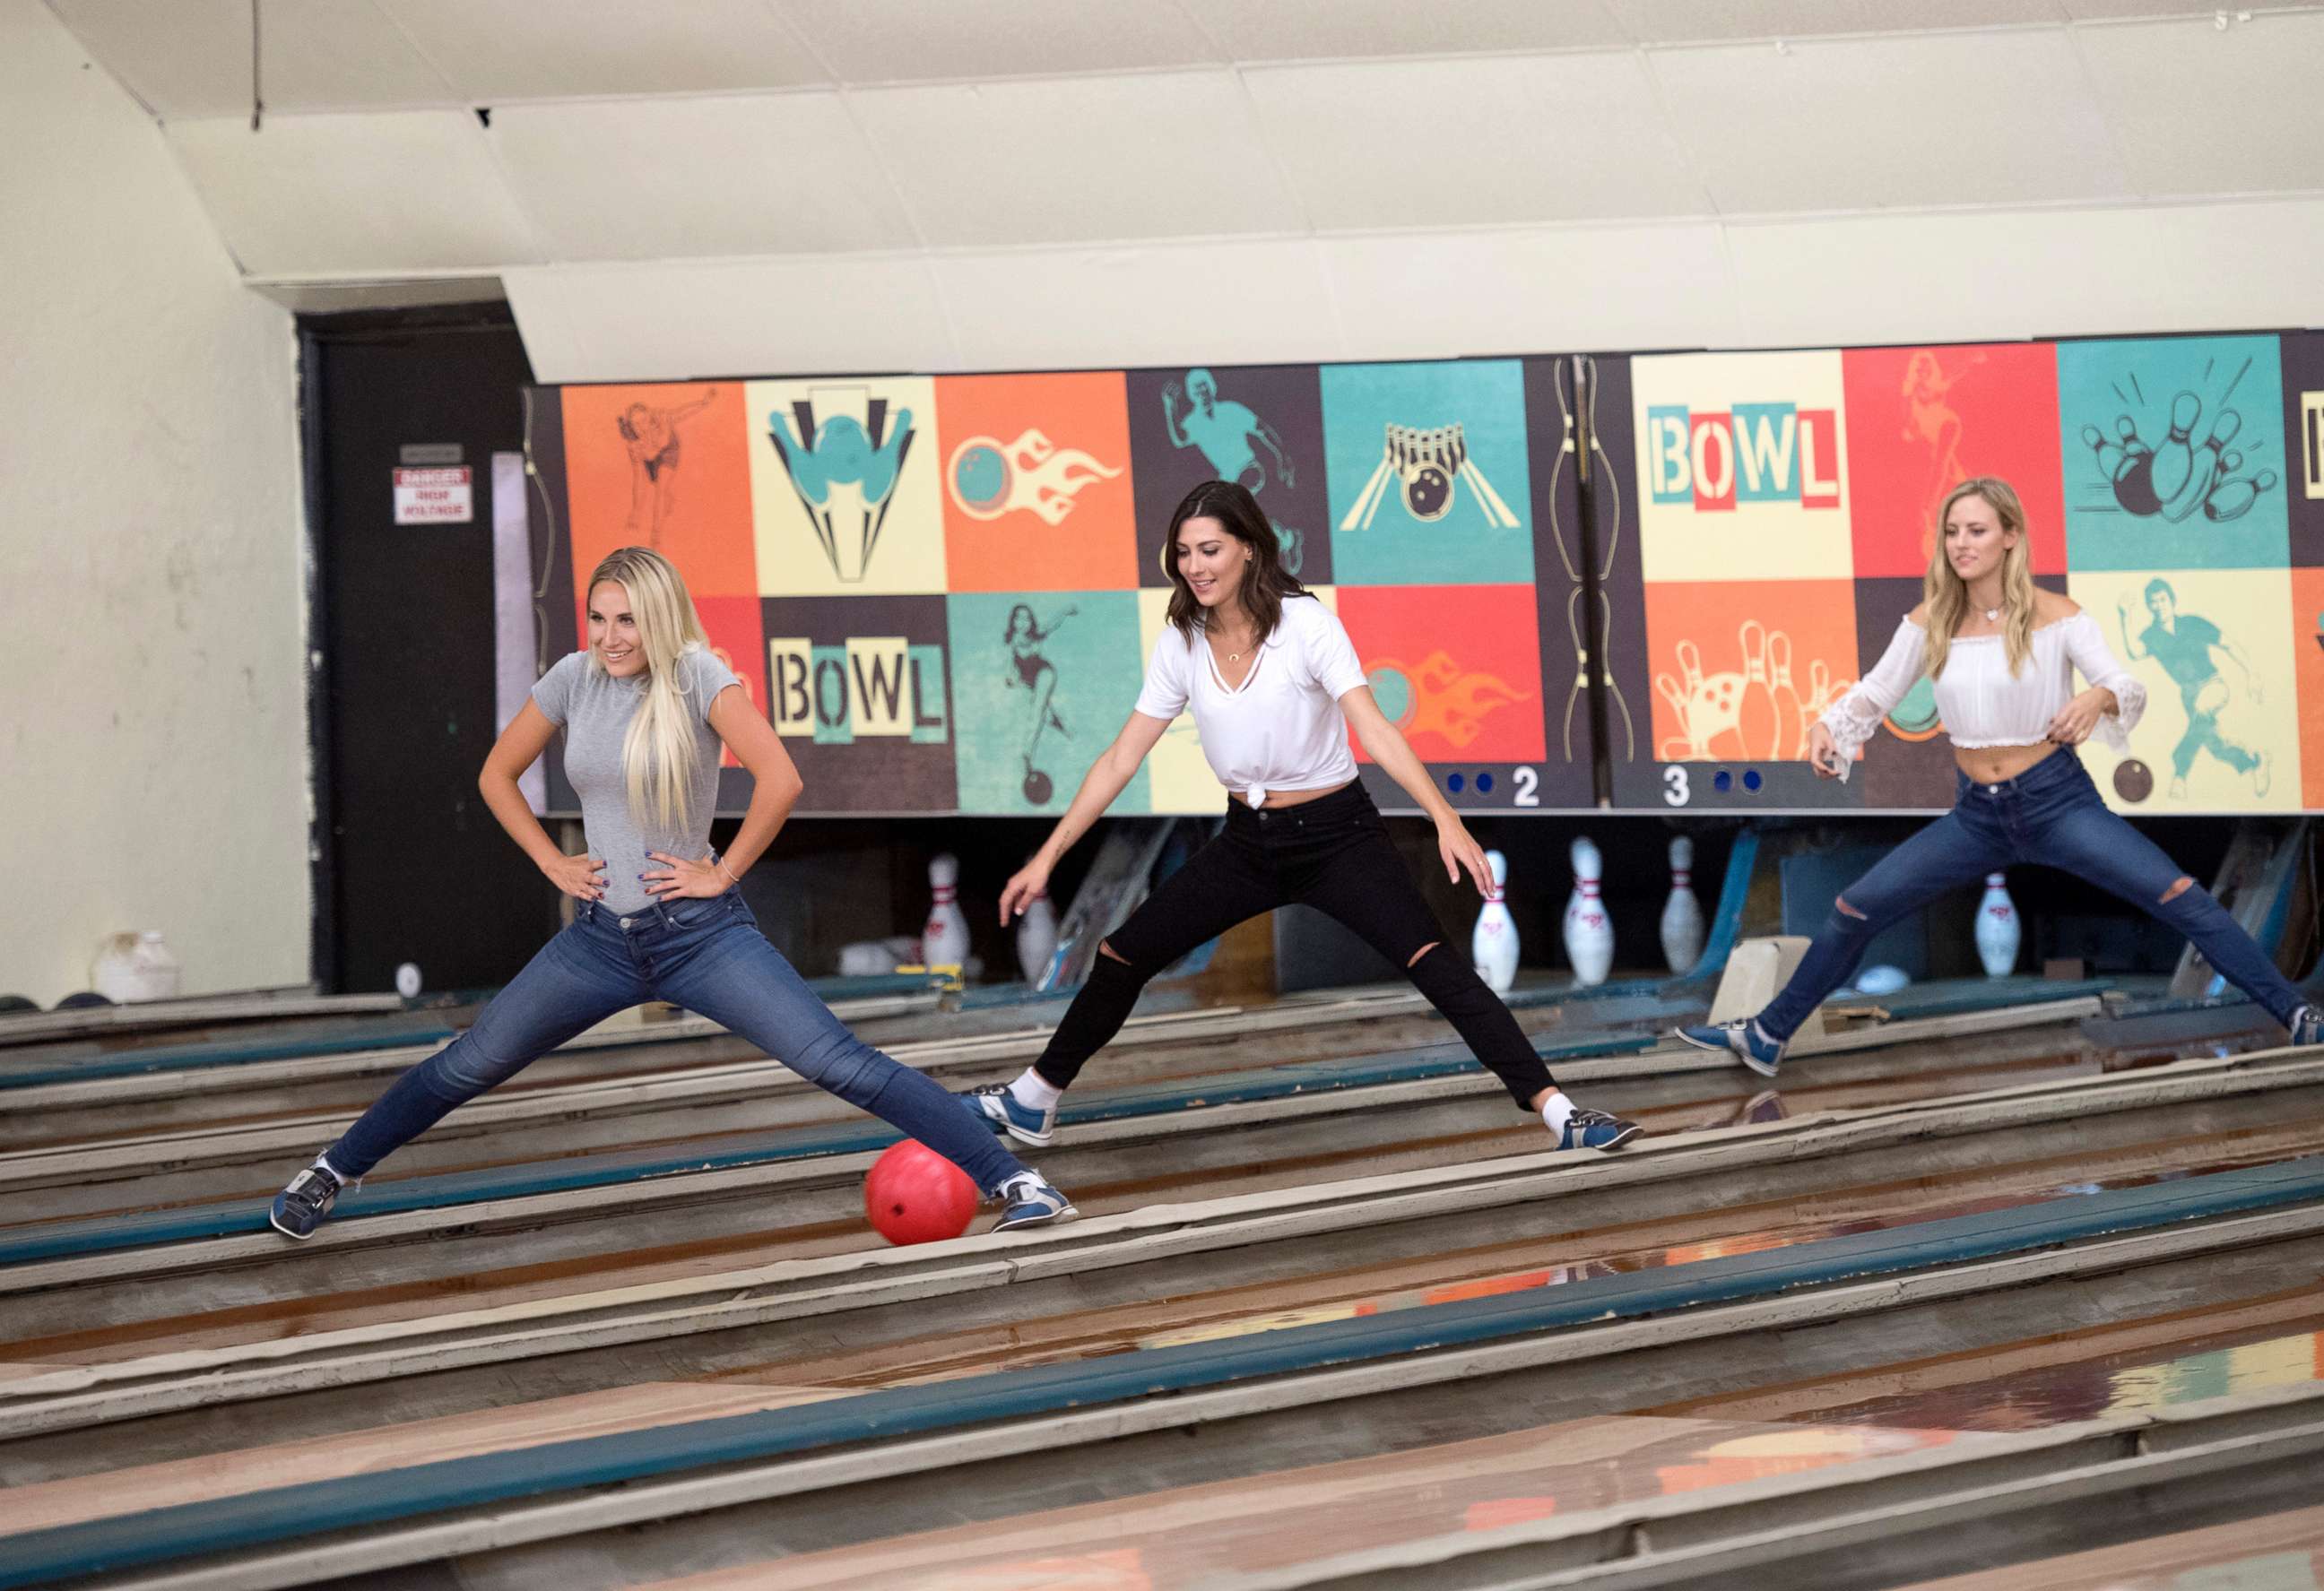 PHOTO: During a competitive day of bowling, Maquel, Rebecca and Kendall compete for the win for a private after-party with Arie, on "The Bachelor," Jan. 29, 2018, on The ABC Television Network.